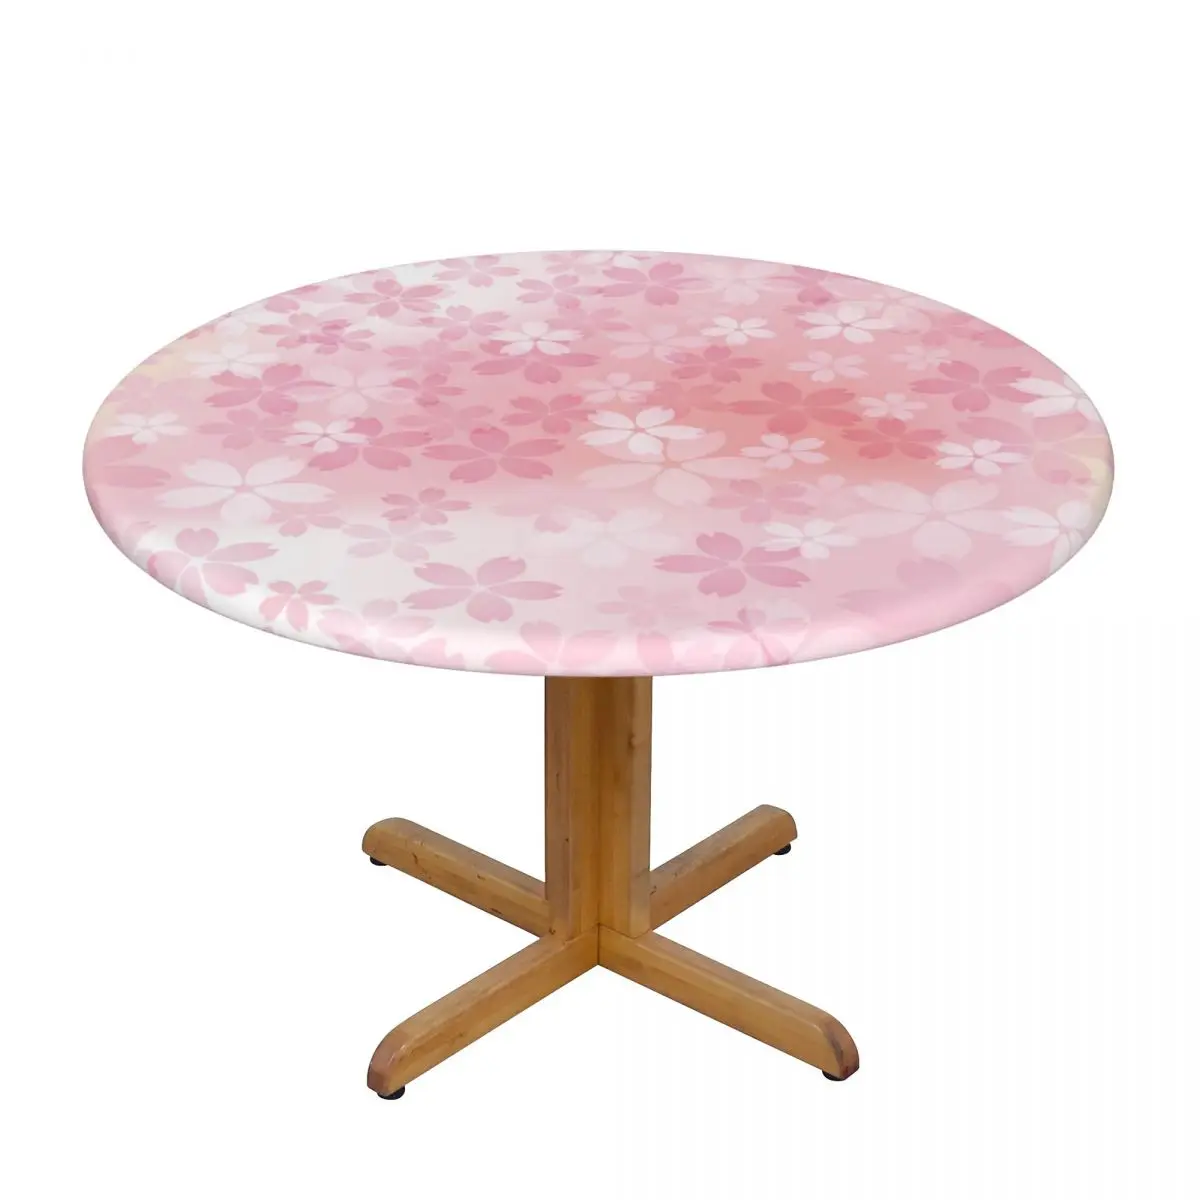 

Pink Cherry Blossoms In Full Bloom Waterproof Polyester Round Tablecloth Catering Fitted Table Cover with Elastic Edged